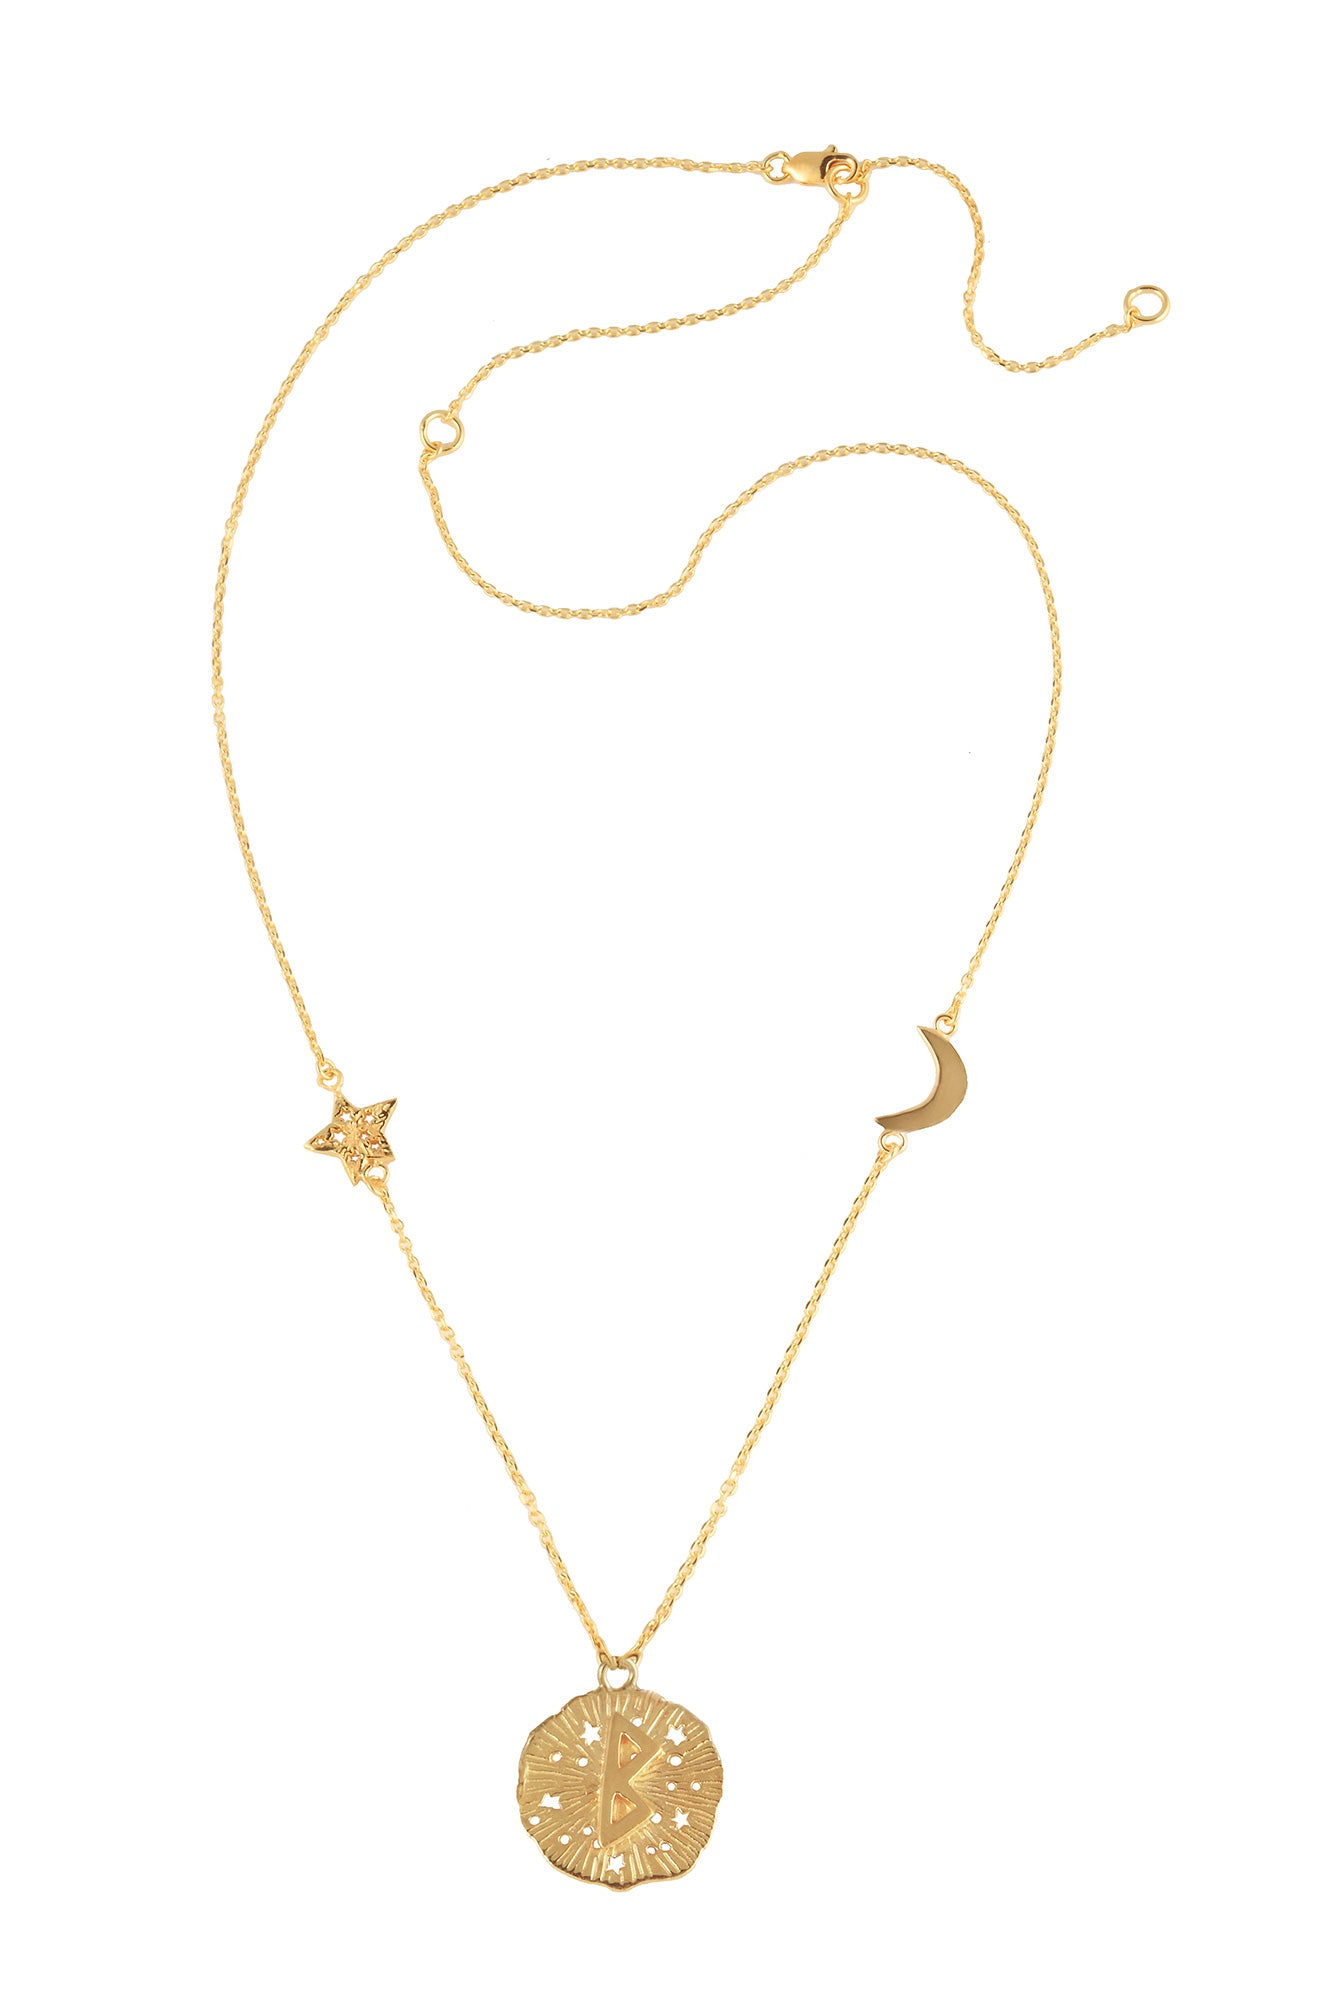 Chain necklace with small runic pendant Berkana, star and moon, 46 сm. Gold plated